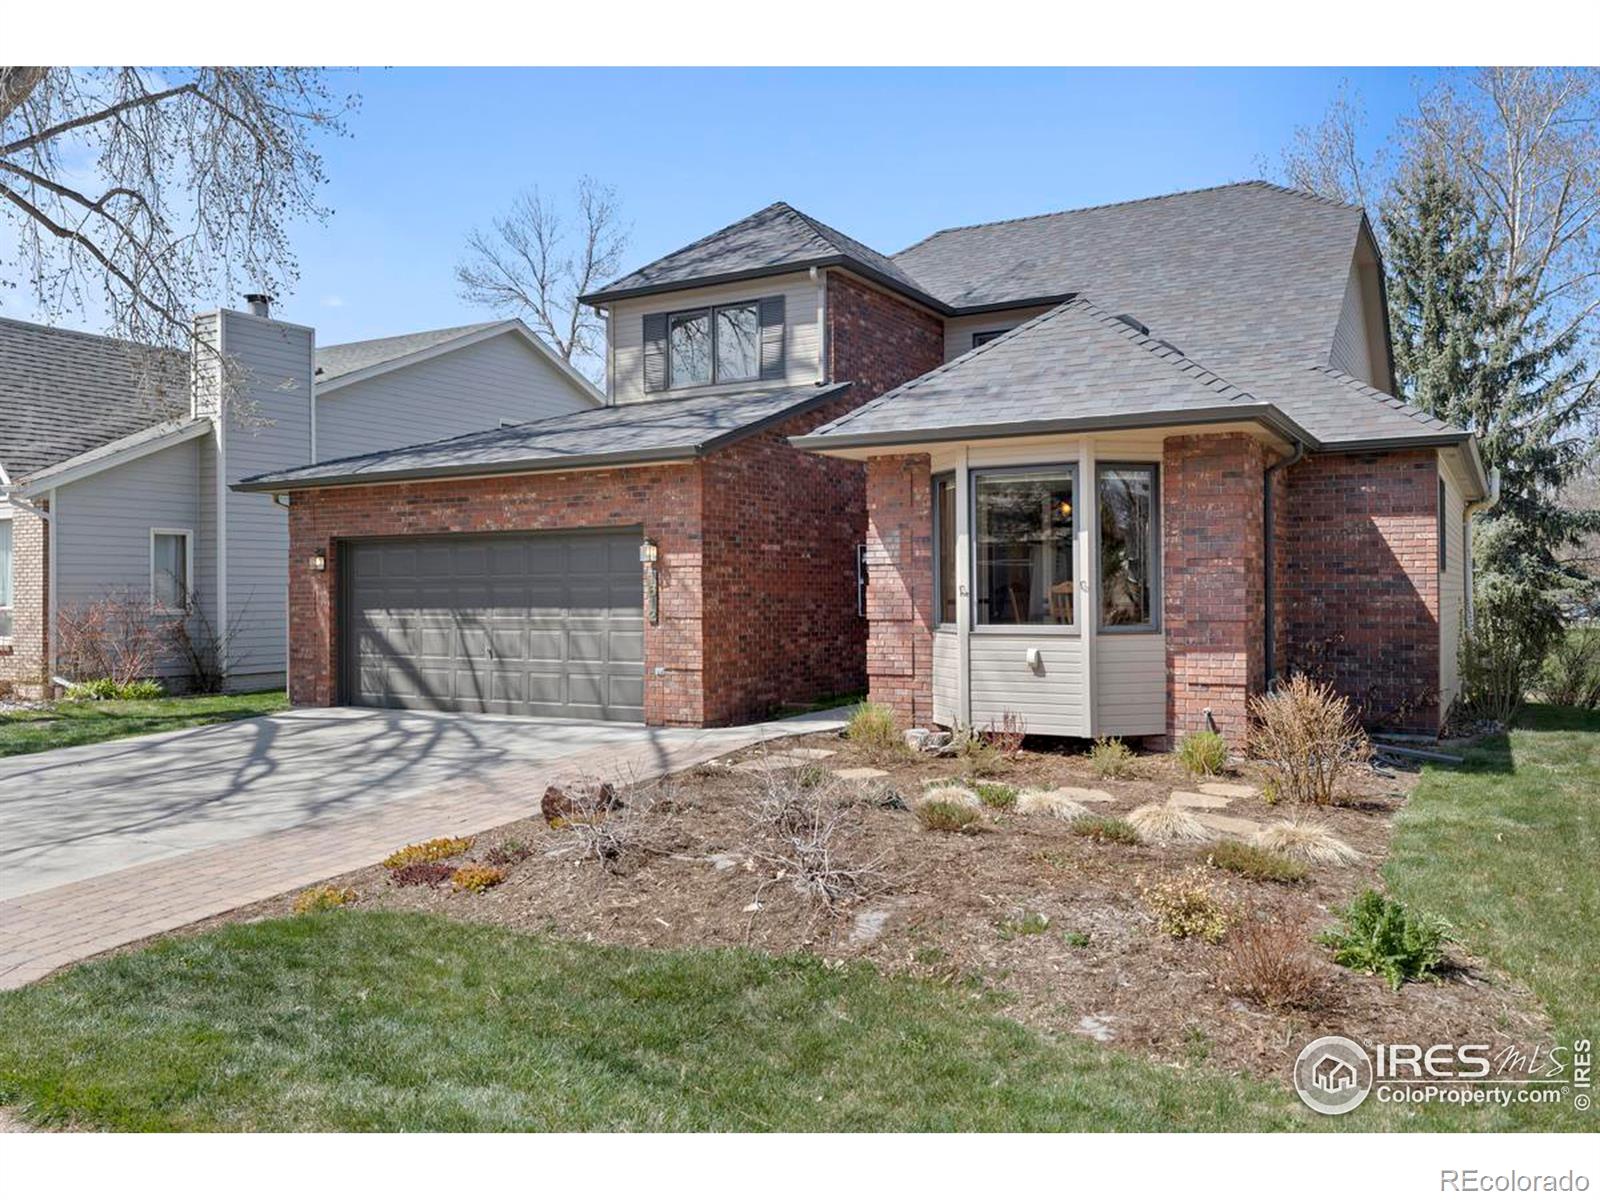 Report Image for 1612  Waterford Lane,Fort Collins, Colorado